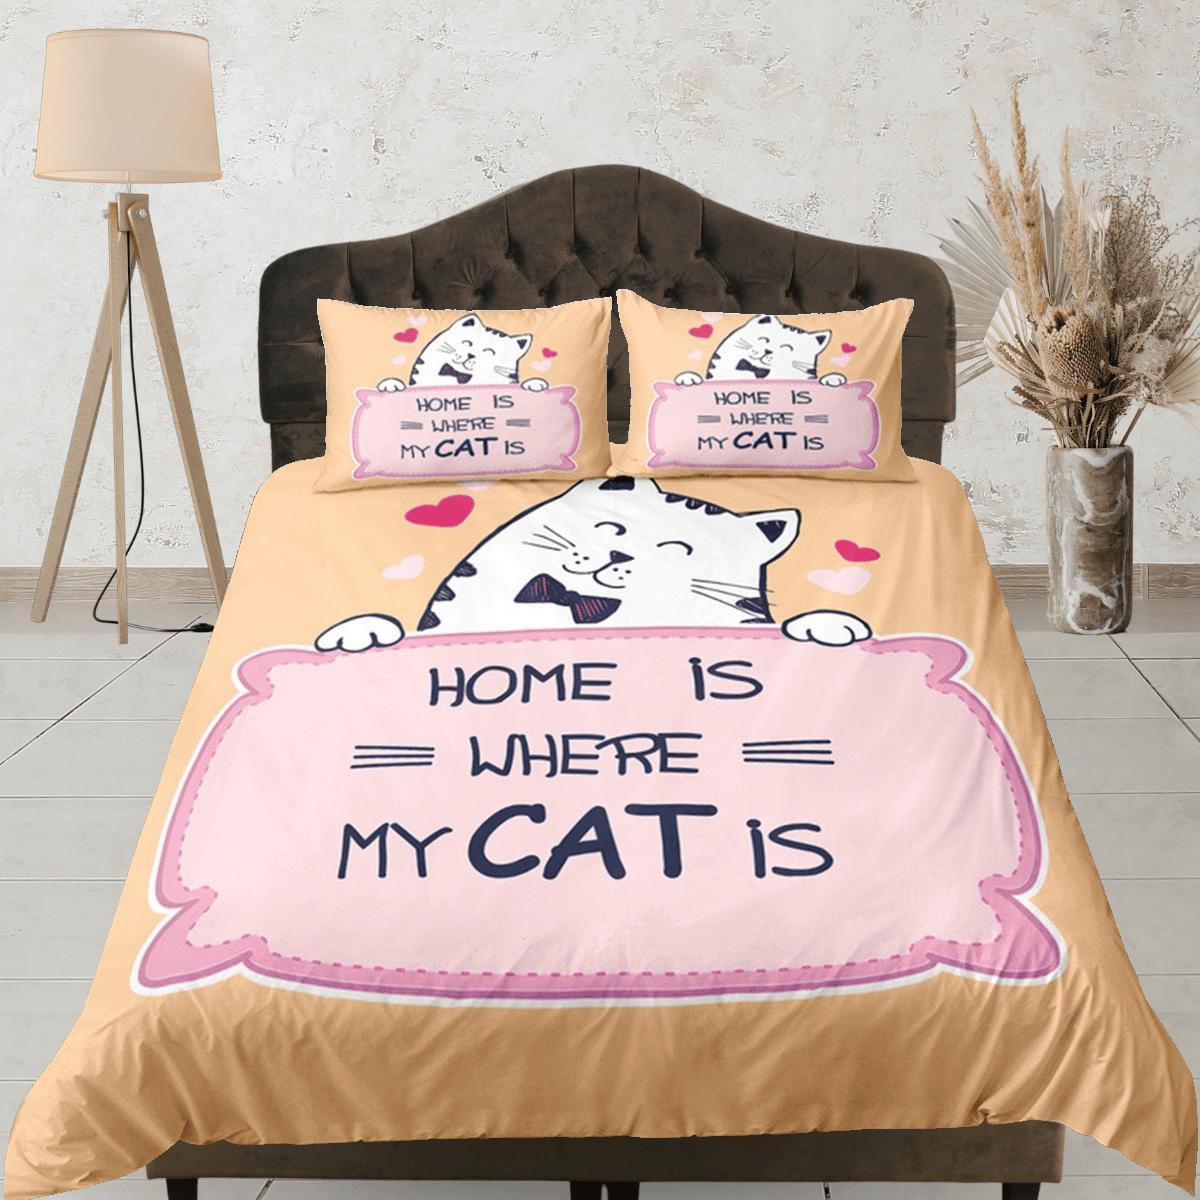 daintyduvet Home is Where My Cat Is Bedding for Cat Lovers, Toddler Bedding, Kids Duvet Cover Set, Baby Bedding, Doona Cover up to California King Size